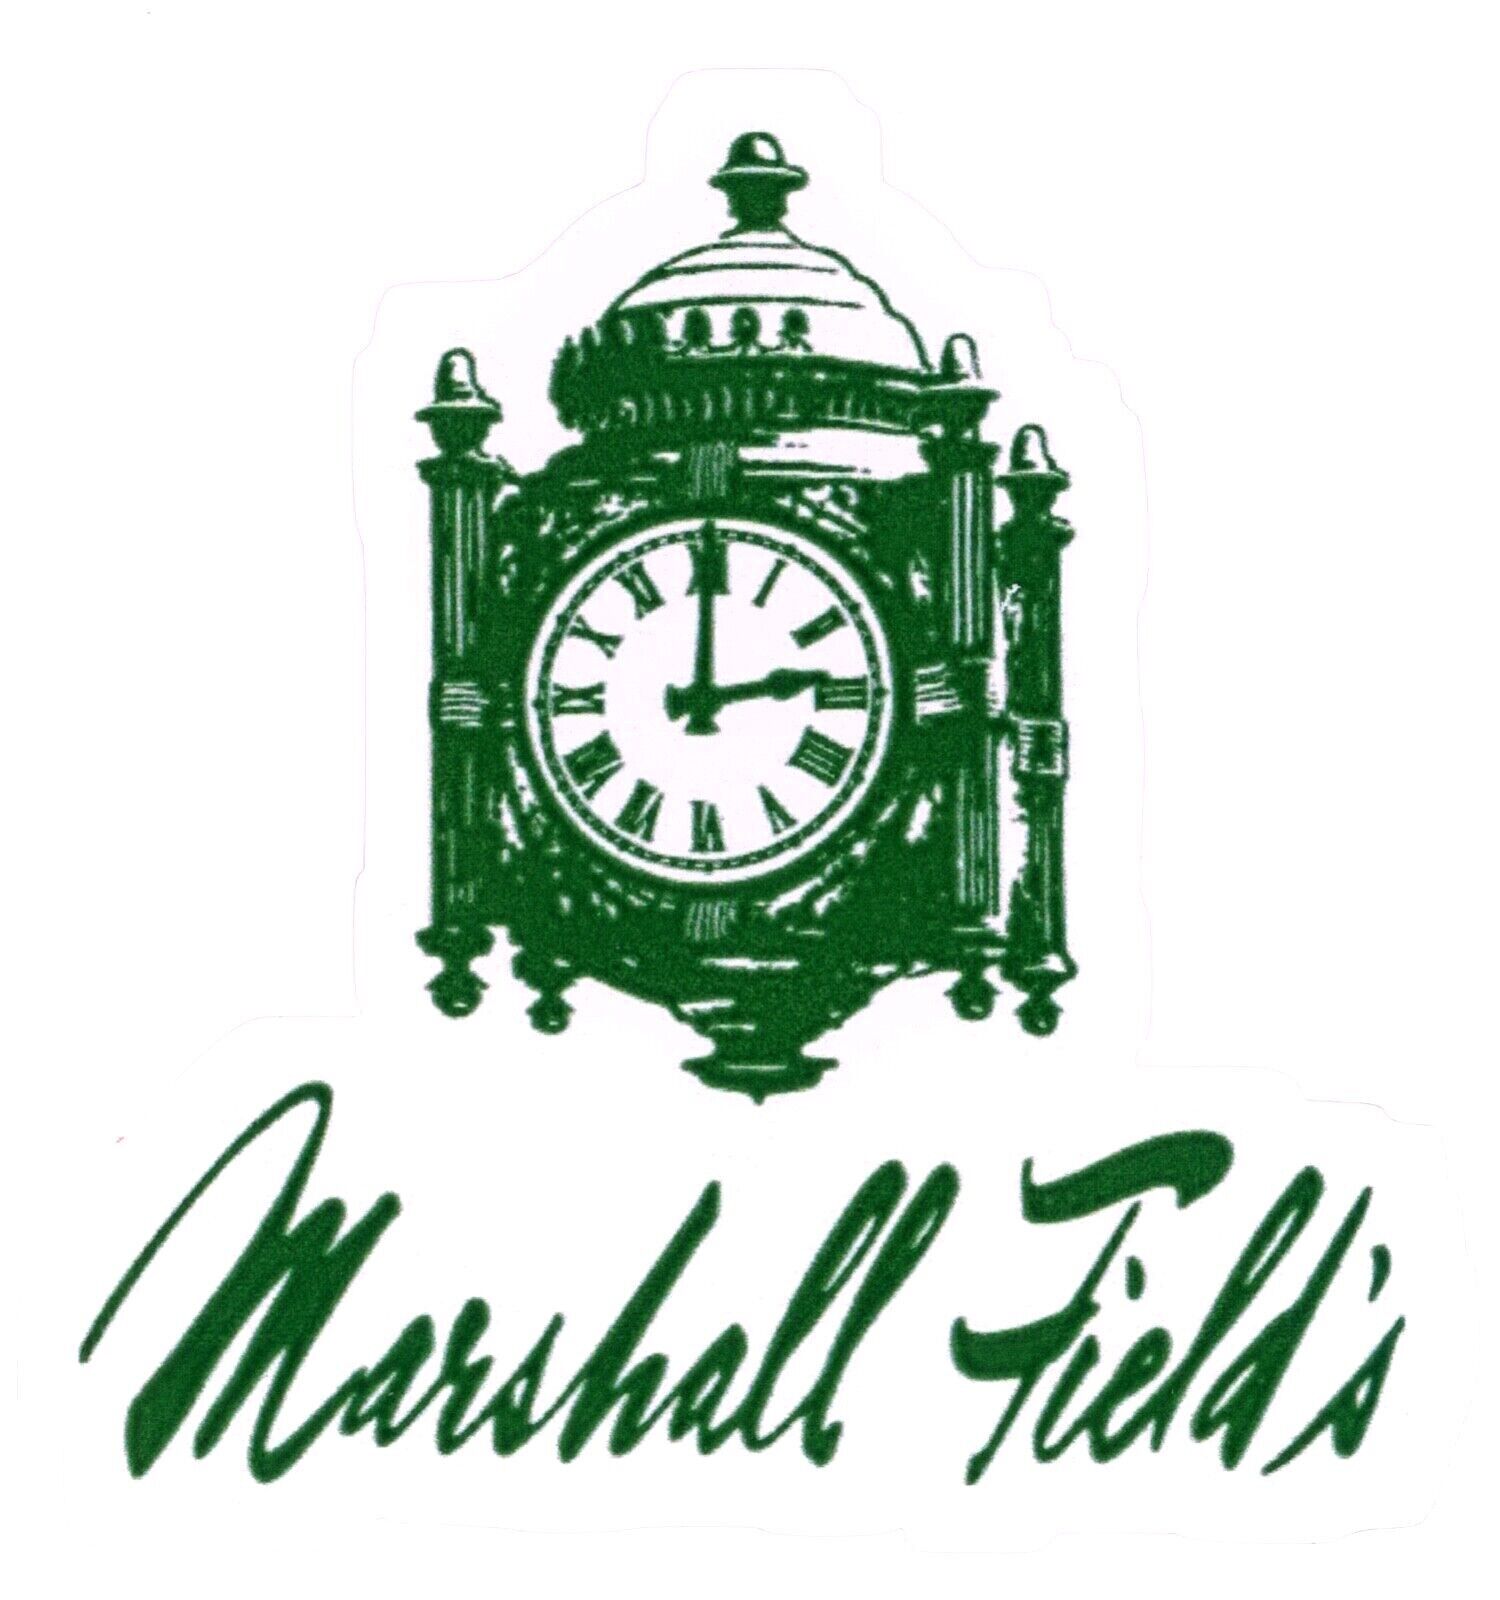 Marshall Field\'s Department Store Logo Sticker (Reproduction)